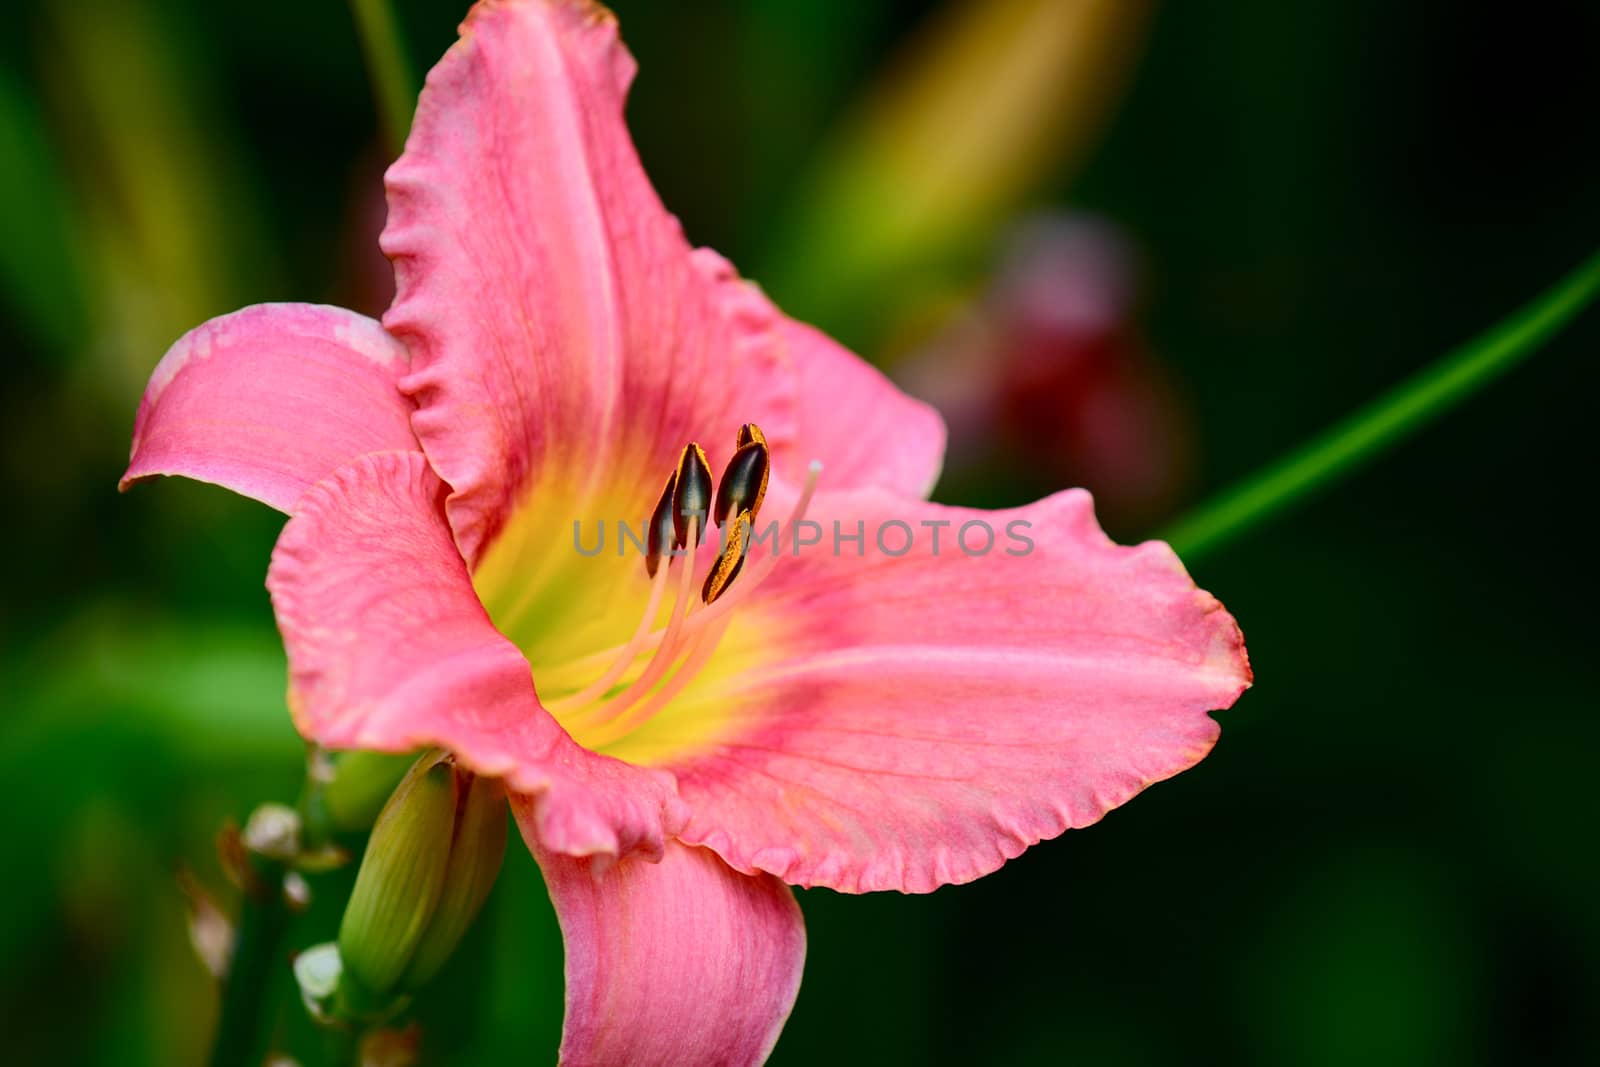 The daylily is a flowering plant in the genus Hemerocallis, a member of the family Asphodelaceae, subfamily Hemerocallidoideae. Despite the common name, it is not in fact a lily. Gardening enthusiasts and professional horticulturalists have long bred daylily species for their attractive flowers.